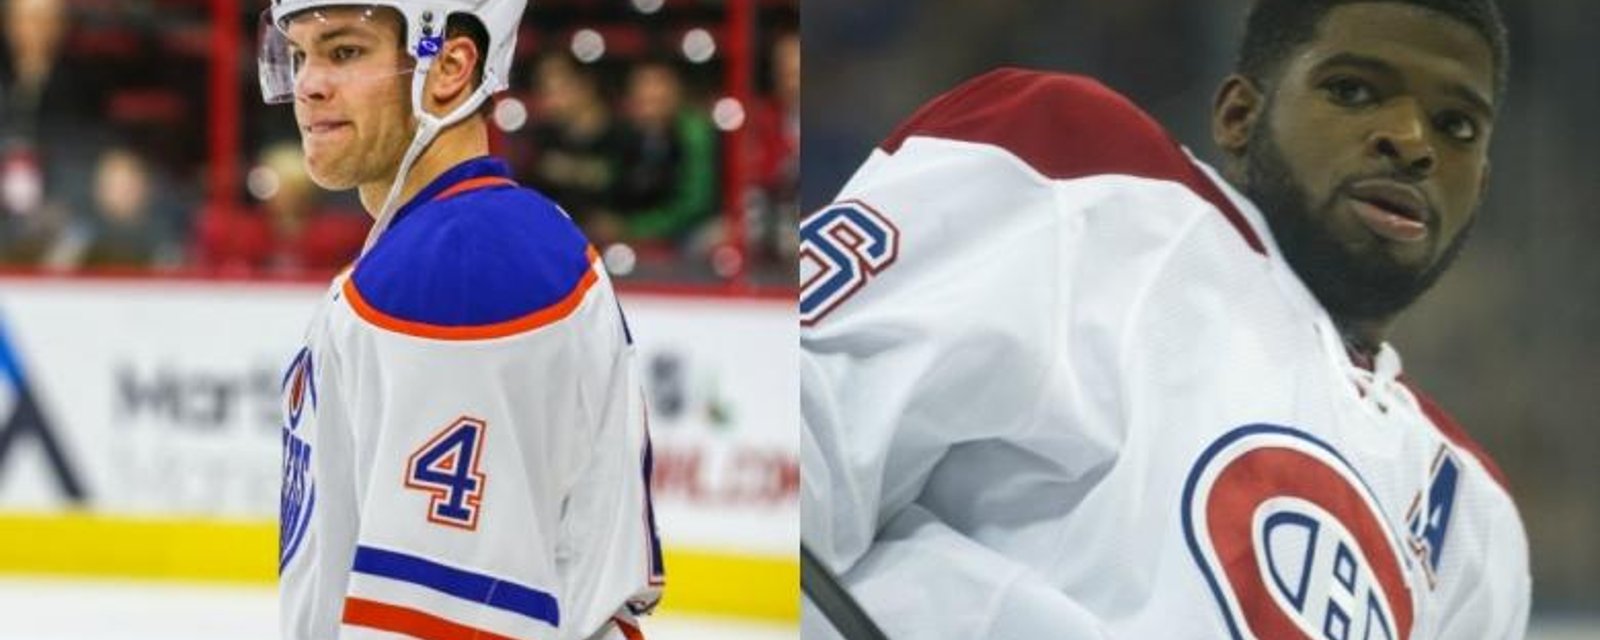 Report: The Oilers could have acquired Subban without giving up Taylor Hall.